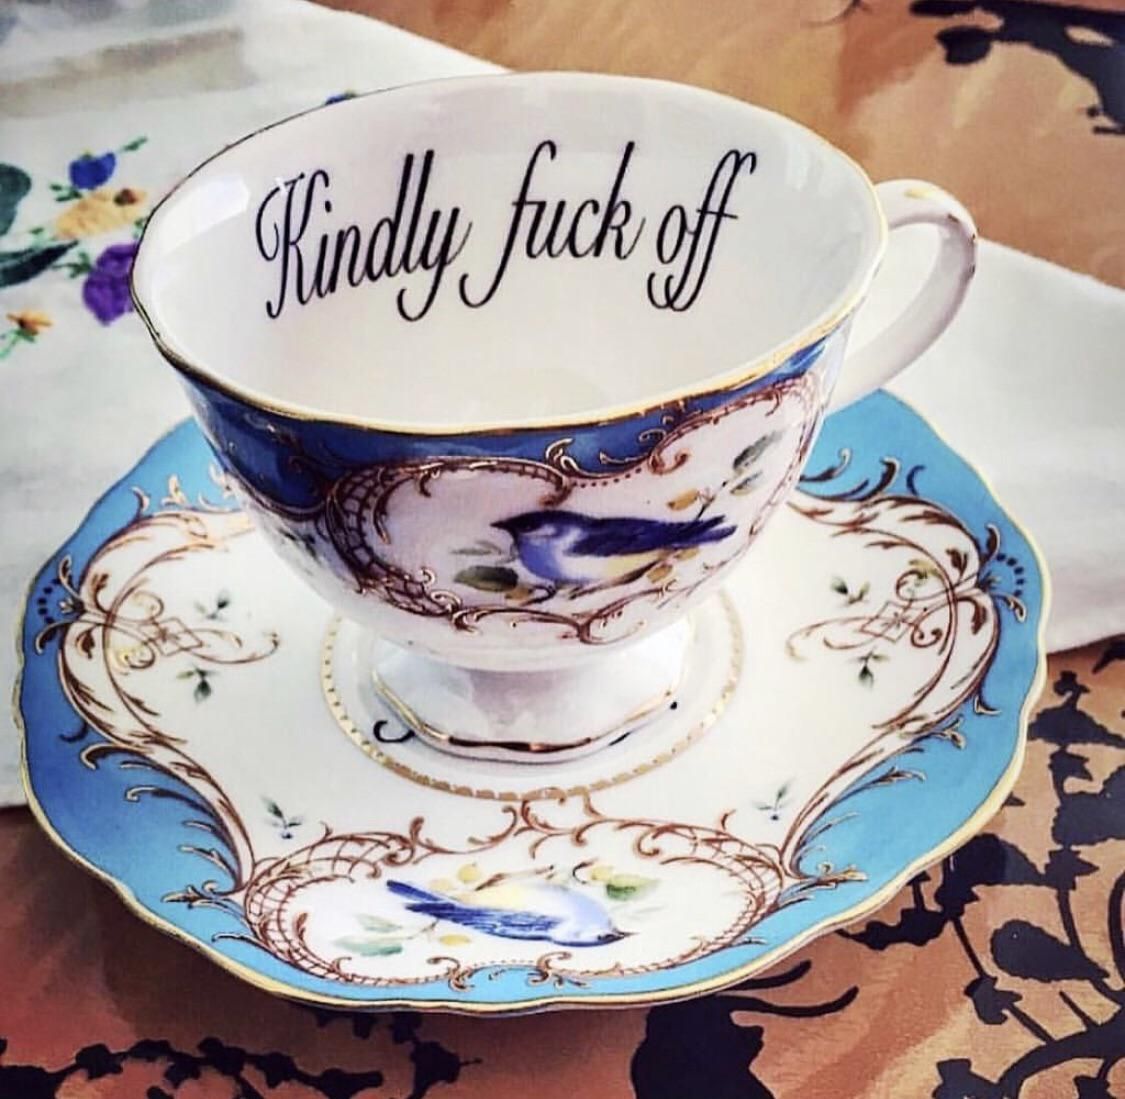 The perfect tea cup